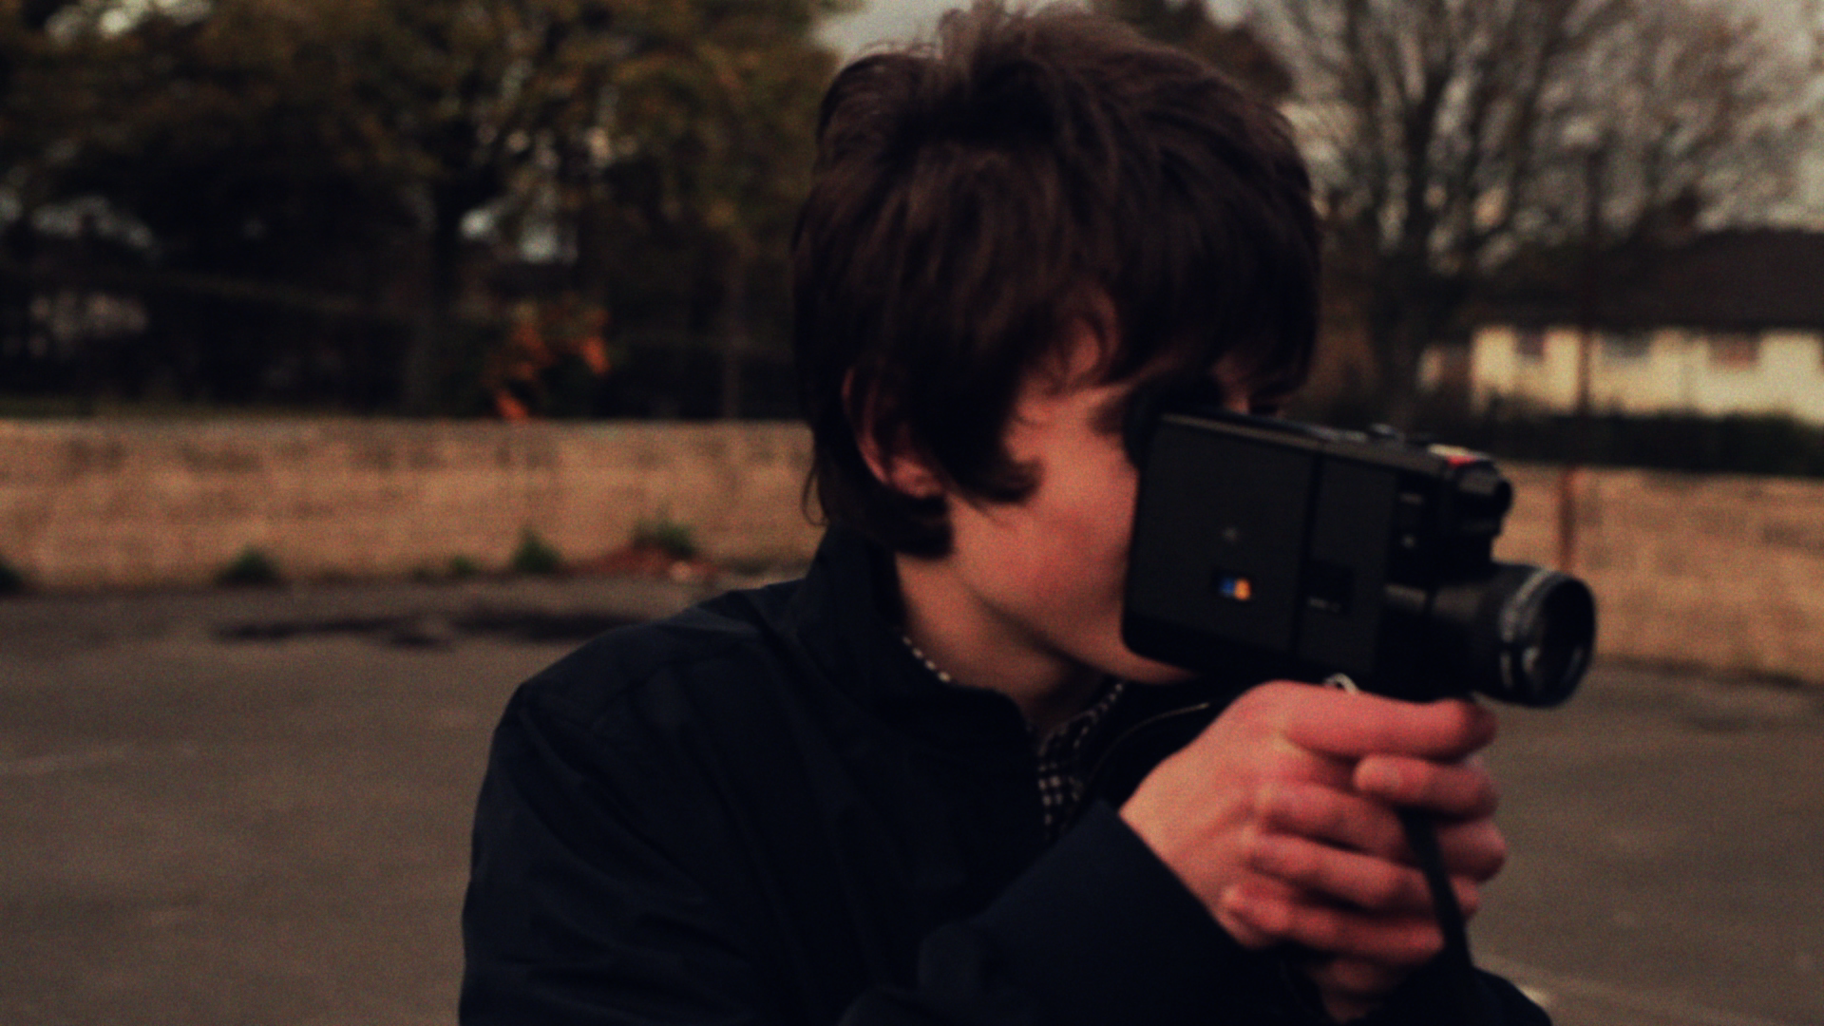 JAKE BUGG 'TROUBLE TOWN' -